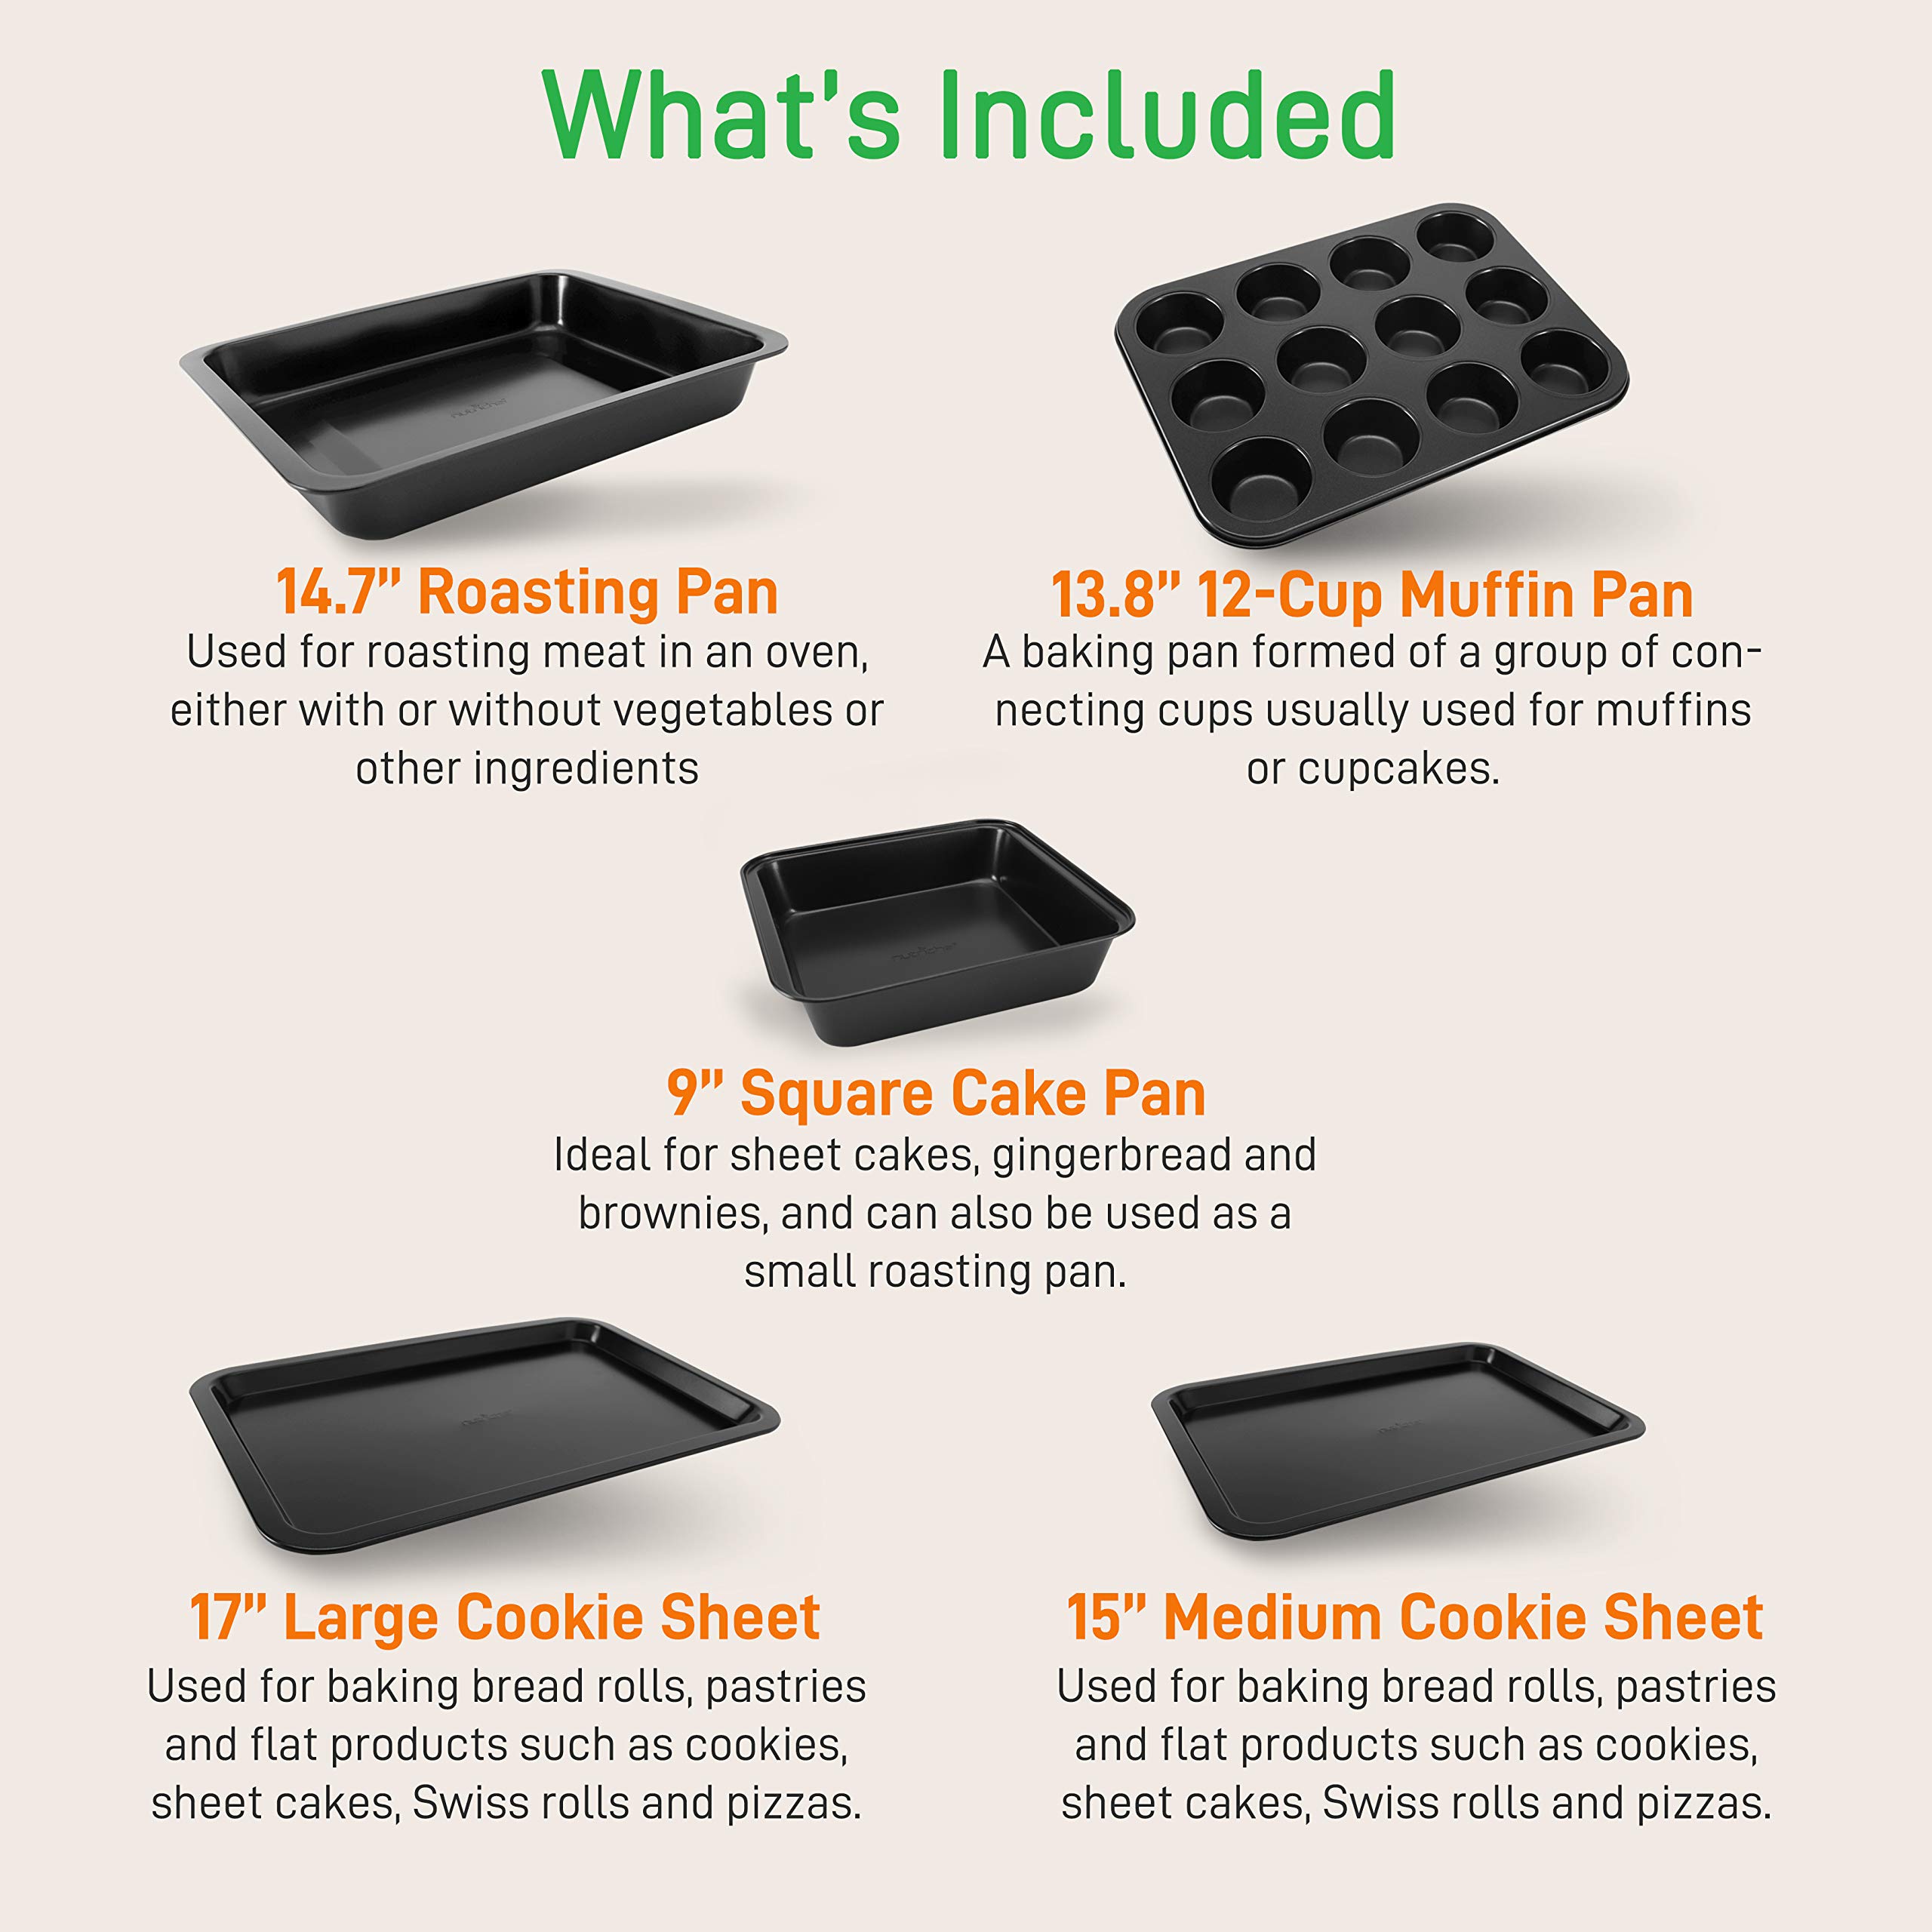 NutriChef 10-Piece Kitchen Oven Baking Pans - Deluxe Carbon Steel Bakeware Set with Stylish Non-stick Gray Coating Inside and Out, Dishwasher Safe & PFOA, PFOS, PTFE Free - NutriChef